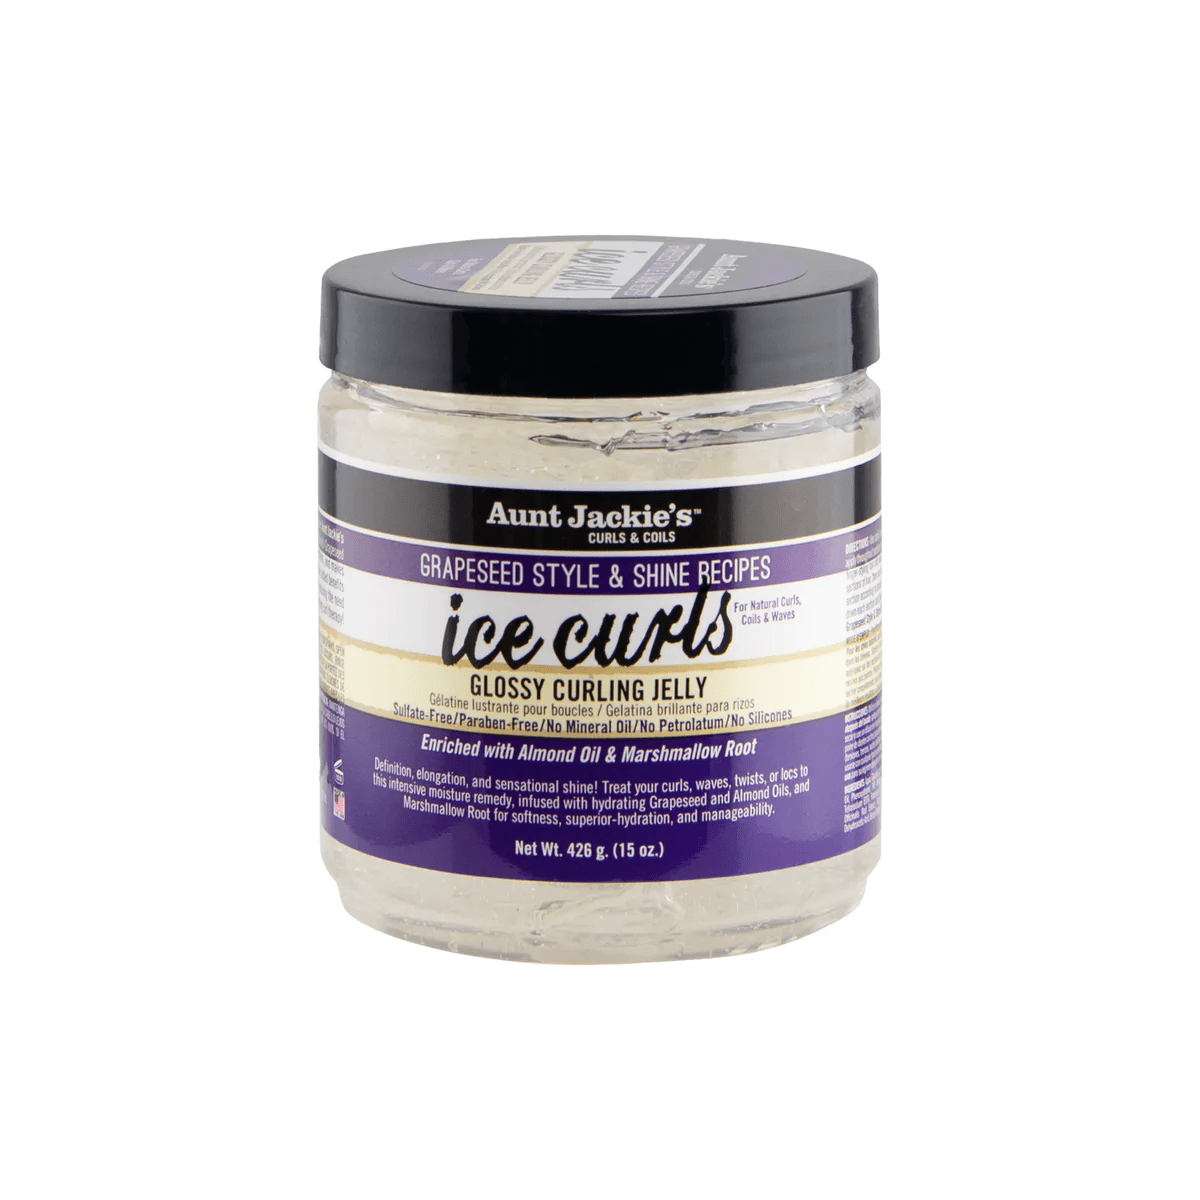 Aunt Jackie’s Grapeseed Ice Curls Glossy Curling Jelly 15oz - Southwestsix Cosmetics Aunt Jackie’s Grapeseed Ice Curls Glossy Curling Jelly 15oz Hair Jelly Aunt Jackie's Southwestsix Cosmetics 034285658151 Aunt Jackie’s Grapeseed Ice Curls Glossy Curling Jelly 15oz